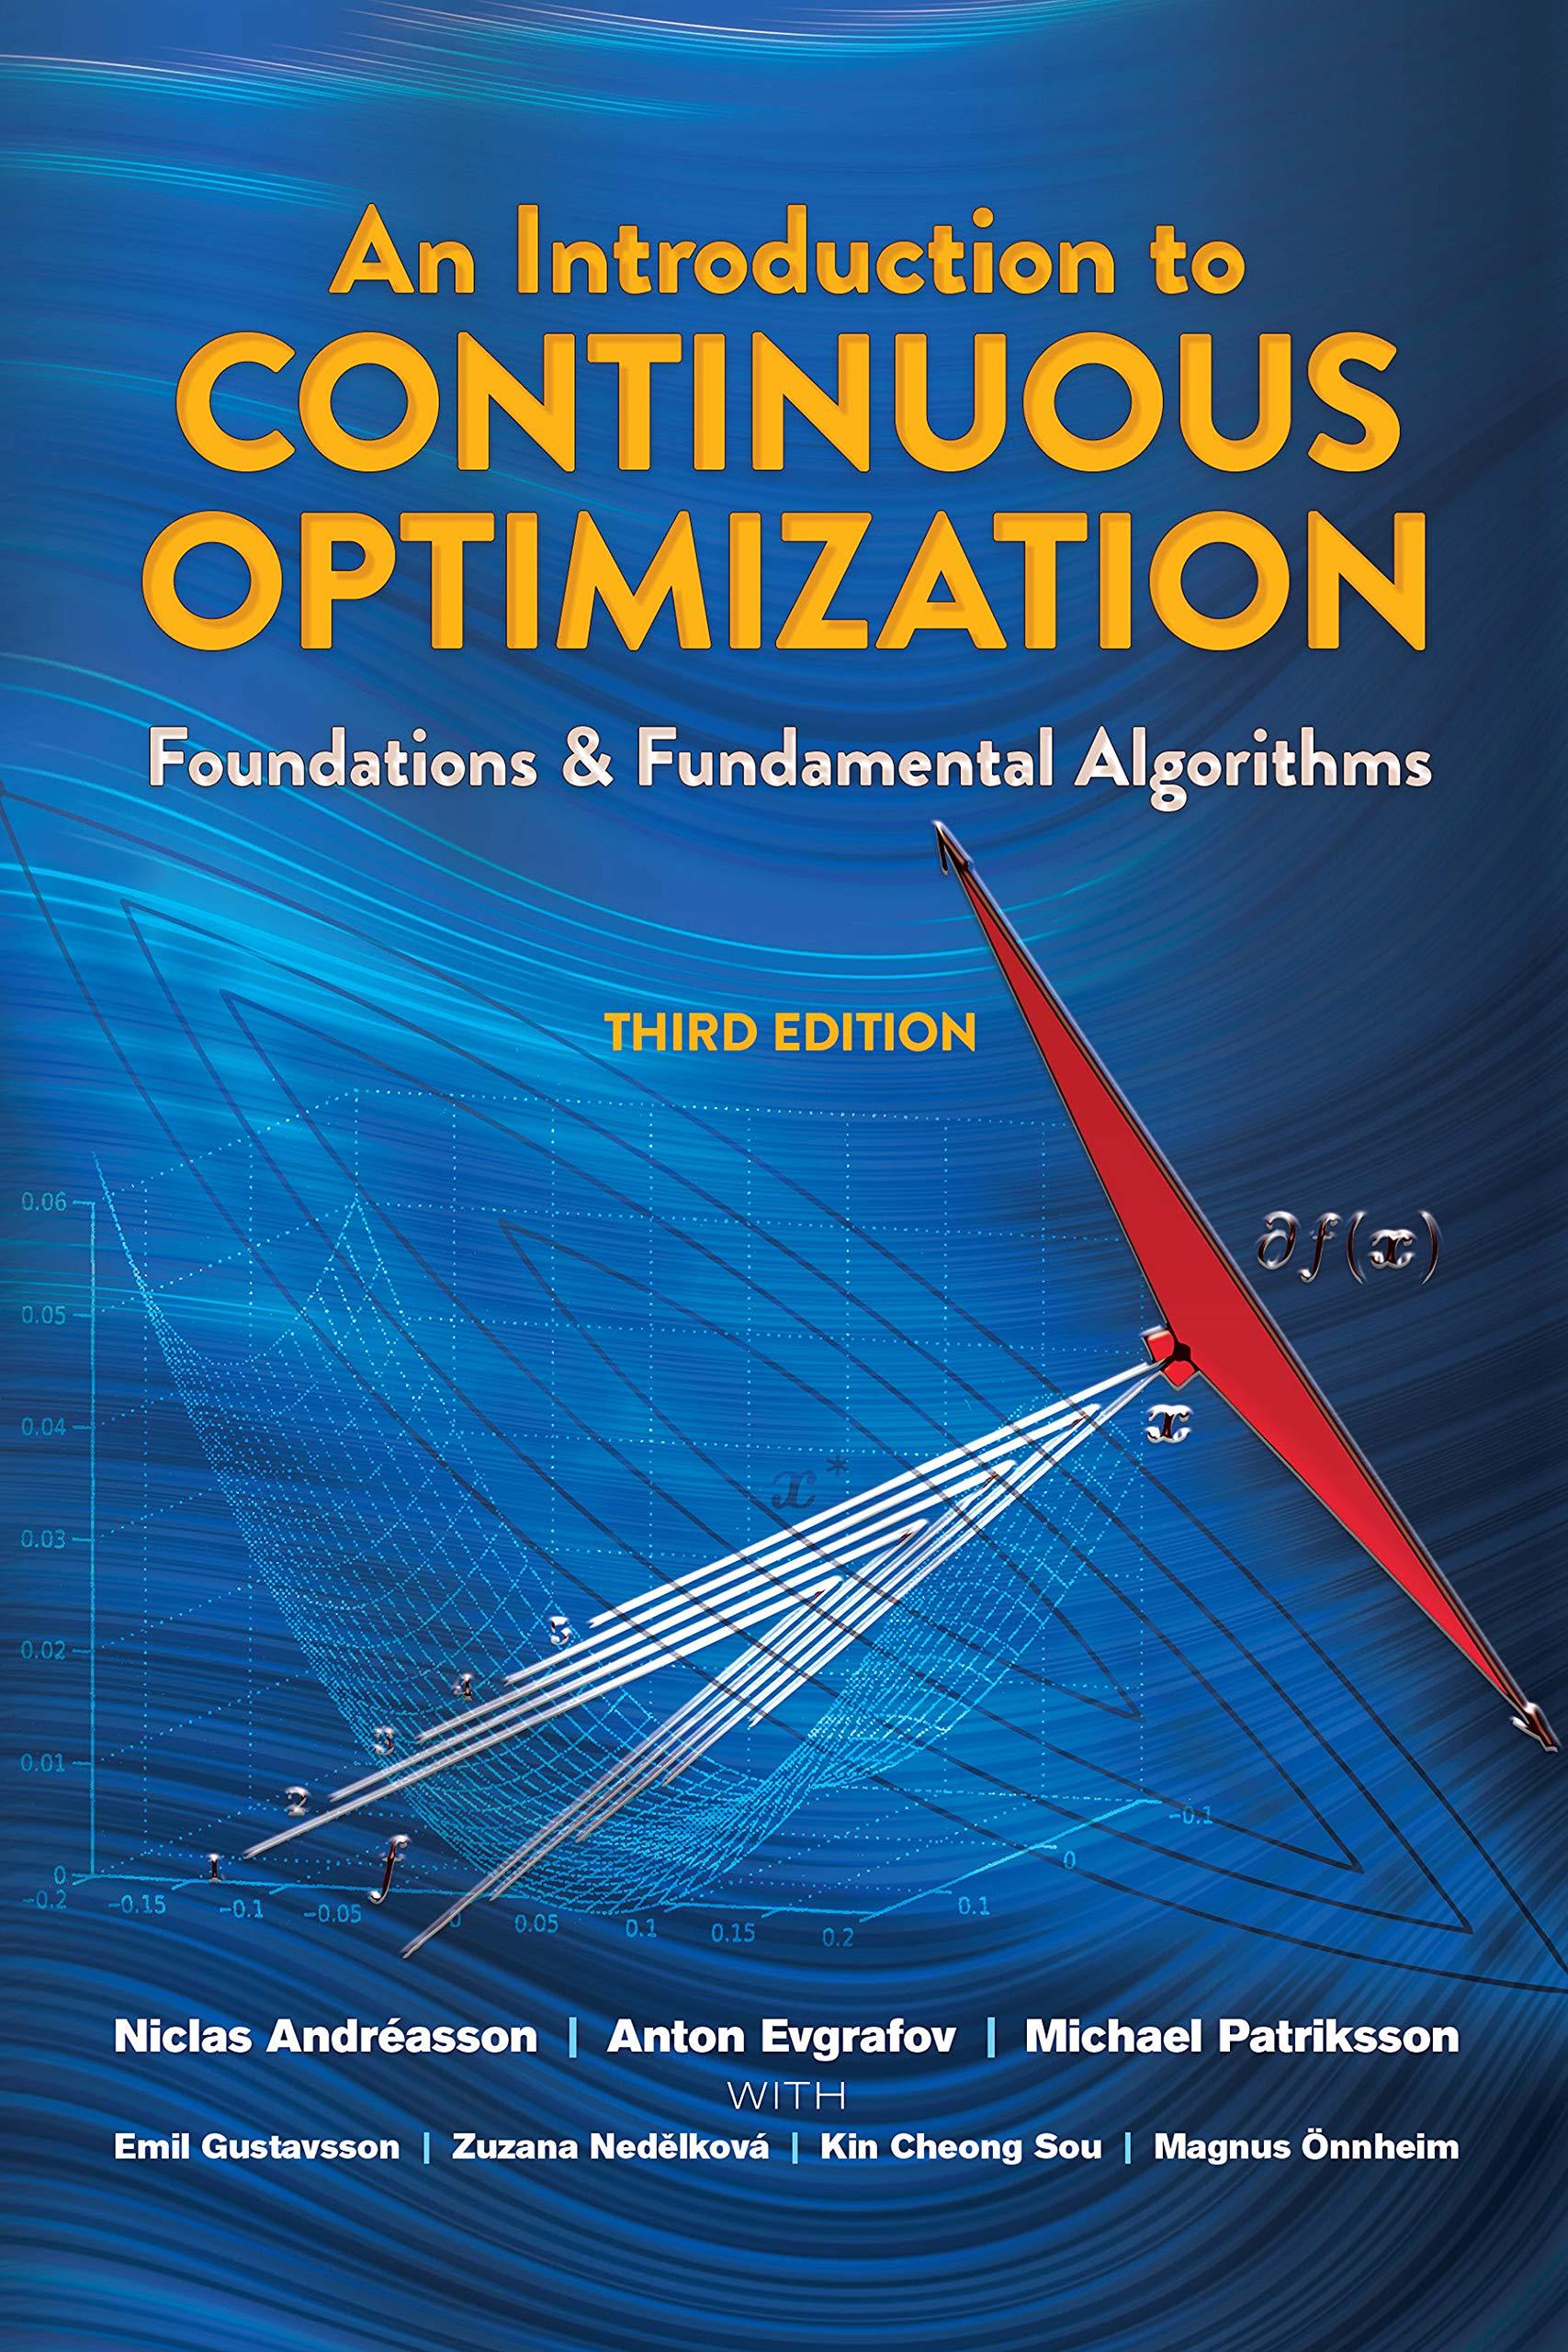 an introduction to continuous optimization 3rd edition niclas andreasson, anton evgrafov, michael patriksson